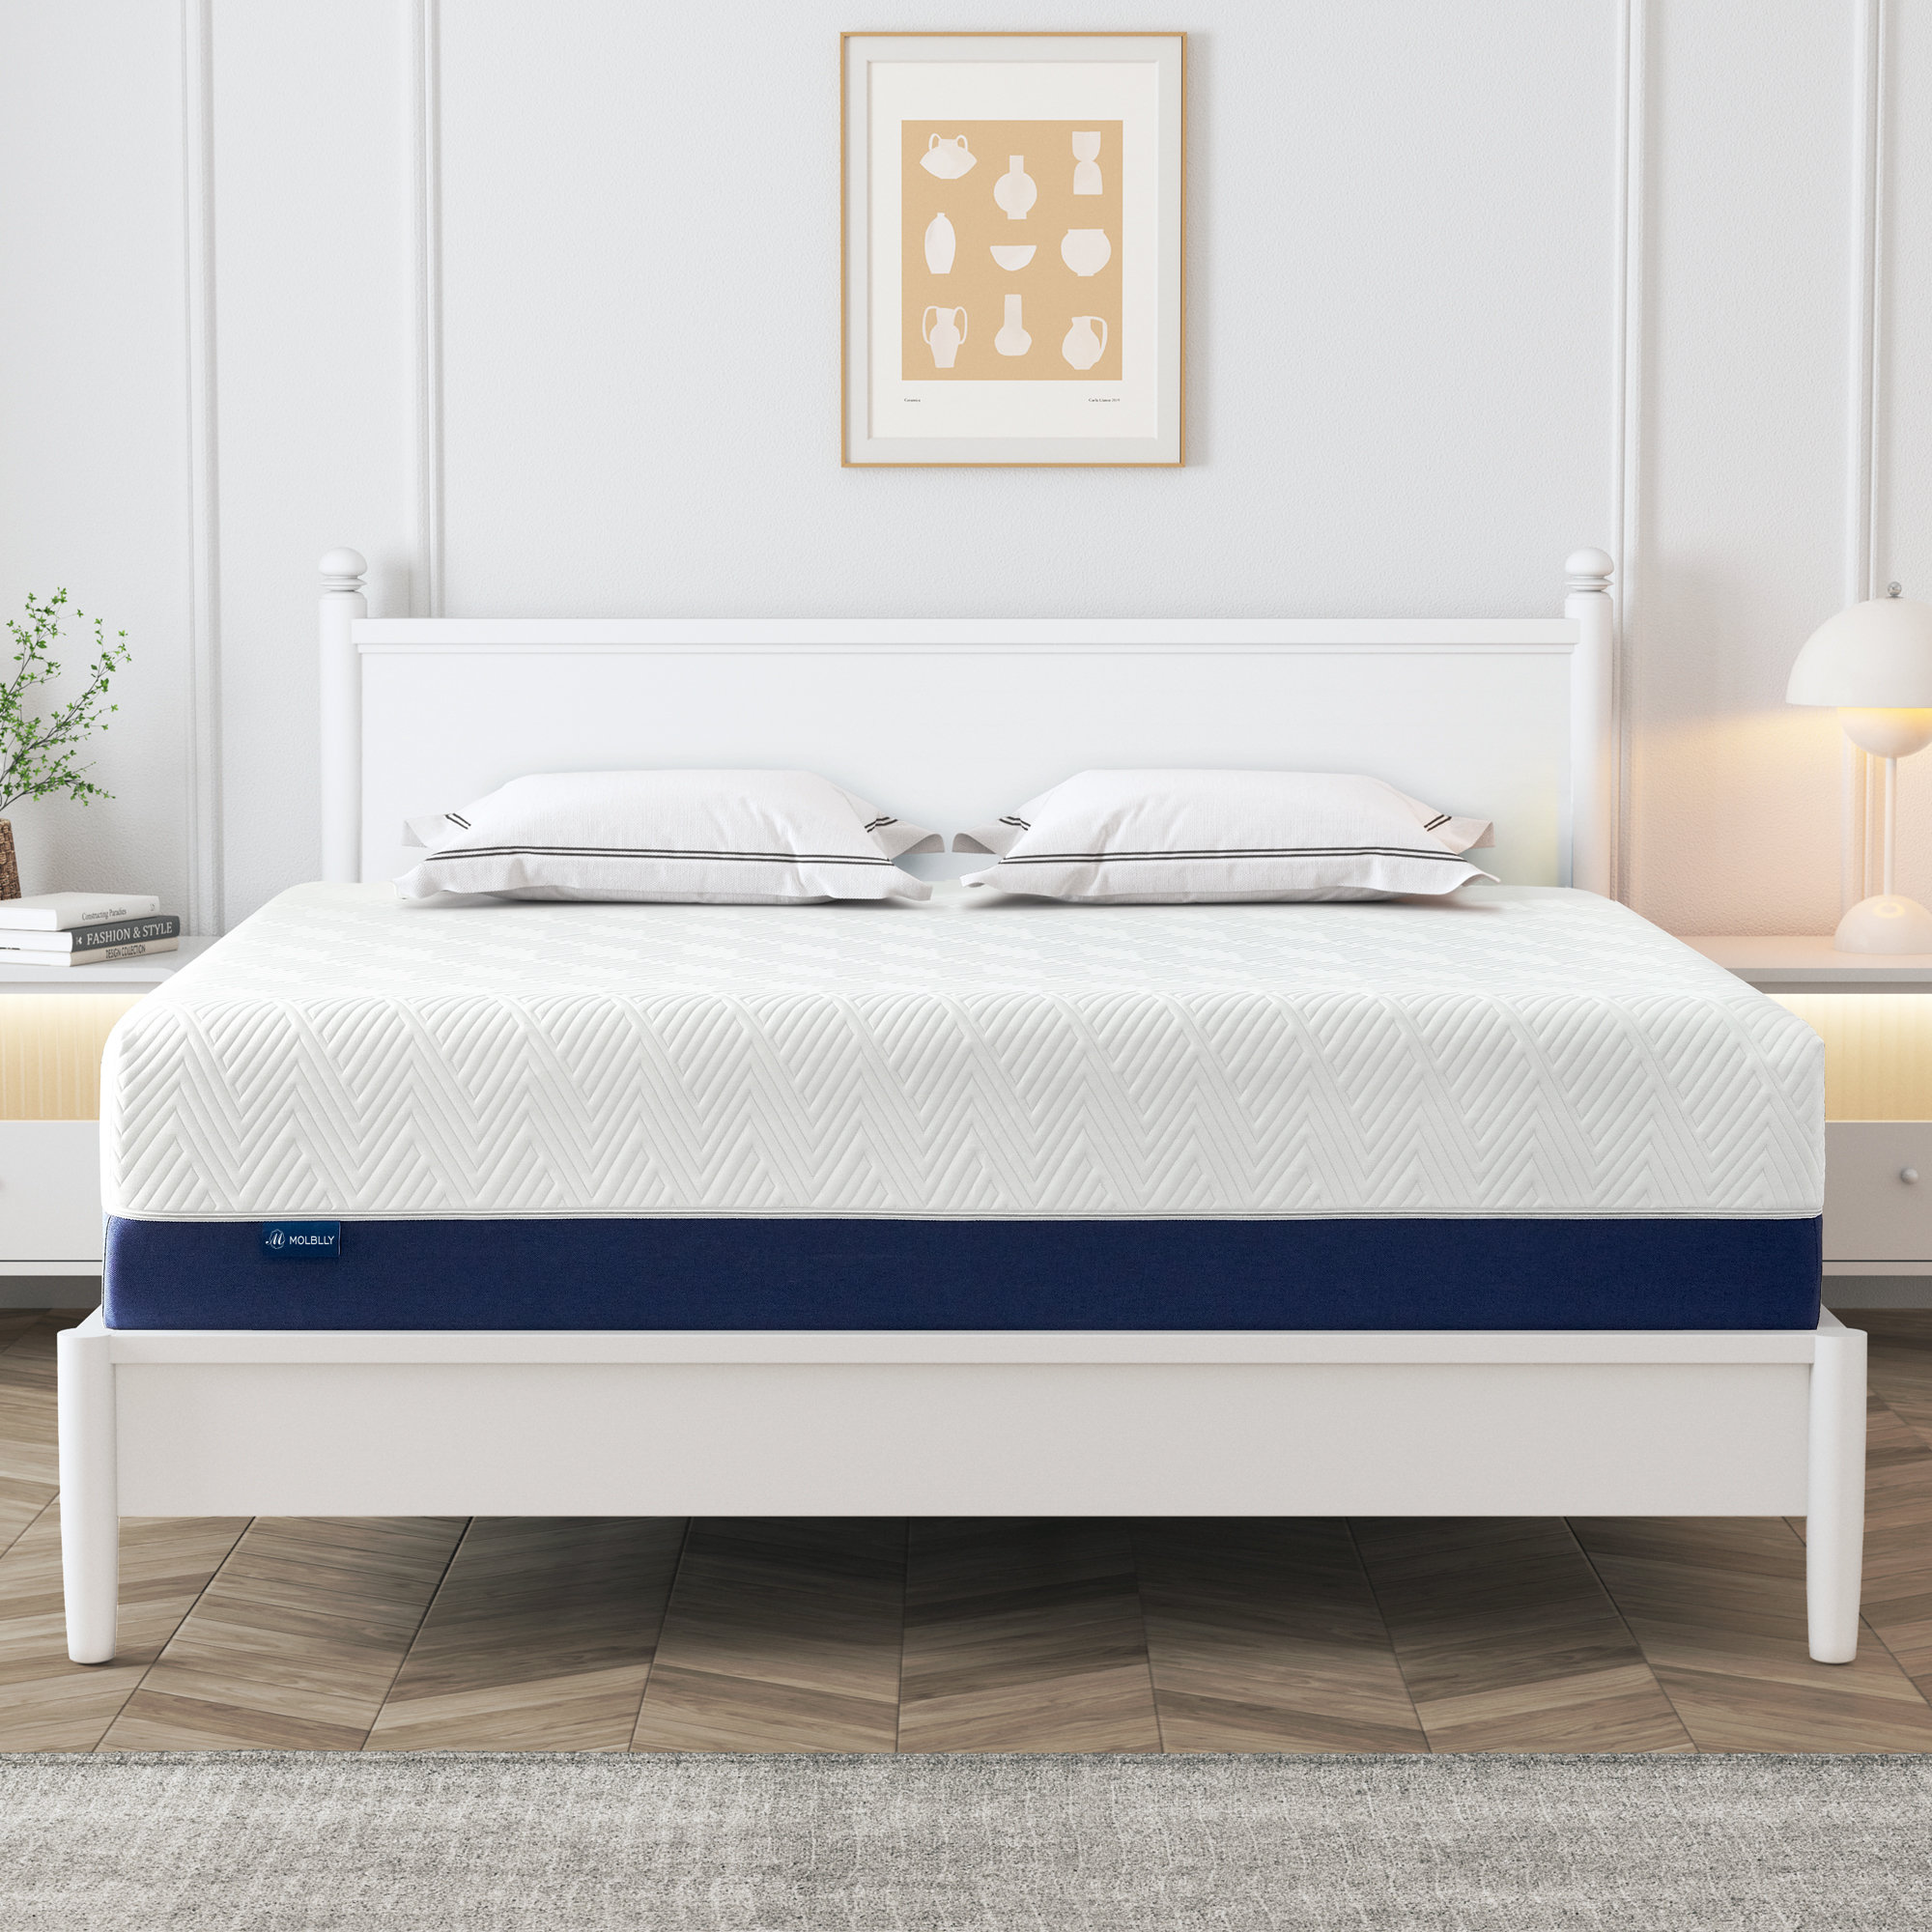 Alloech 14 Deep Blue and White Soft Breathable Comfort Memory Foam  Mattress Quick use & Reviews